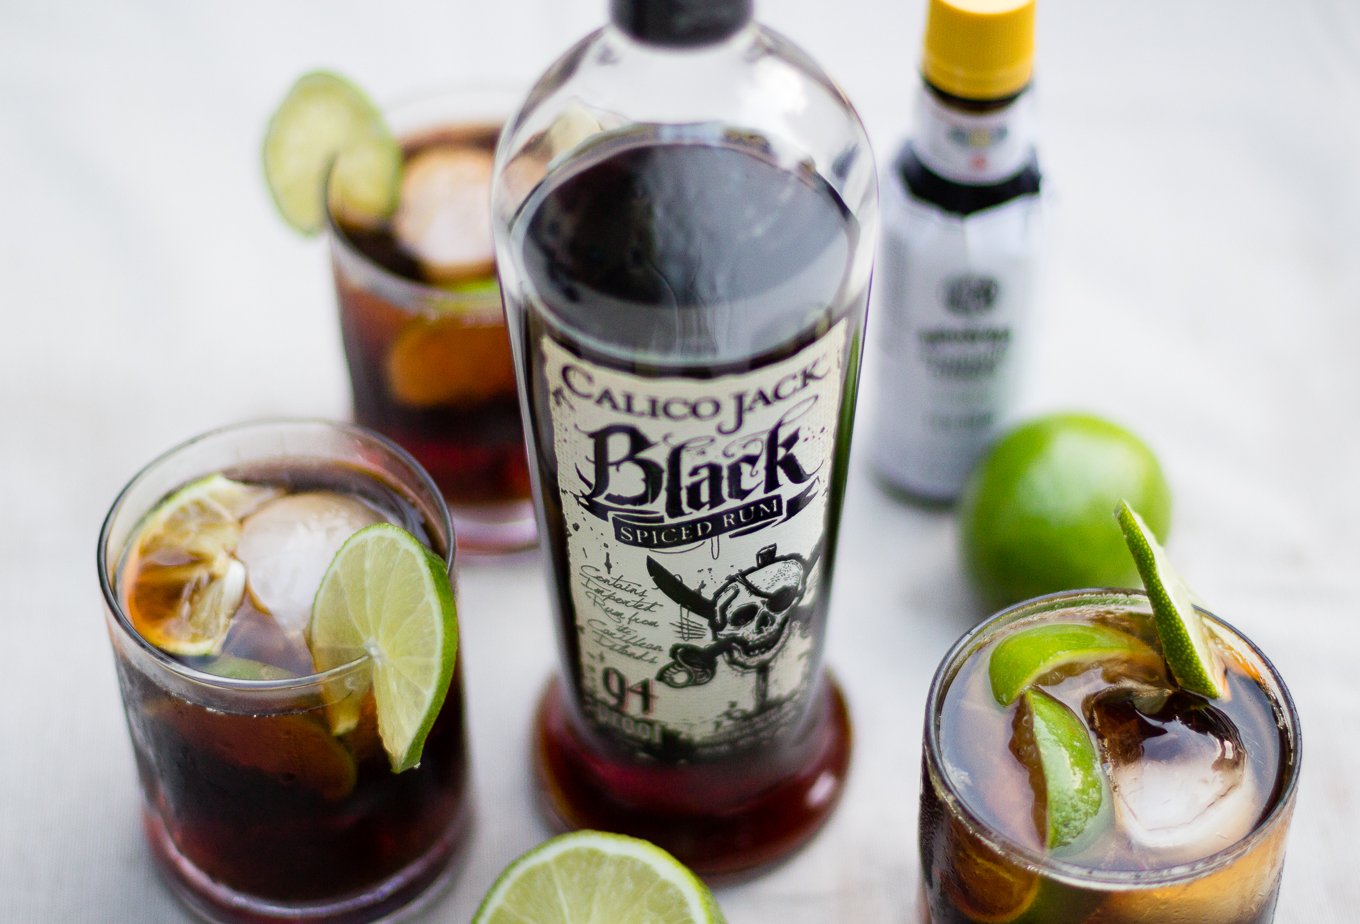 calico jack spiced rum, dirty coke, cocktail recipe, sponsored post, how to make a rum and coke